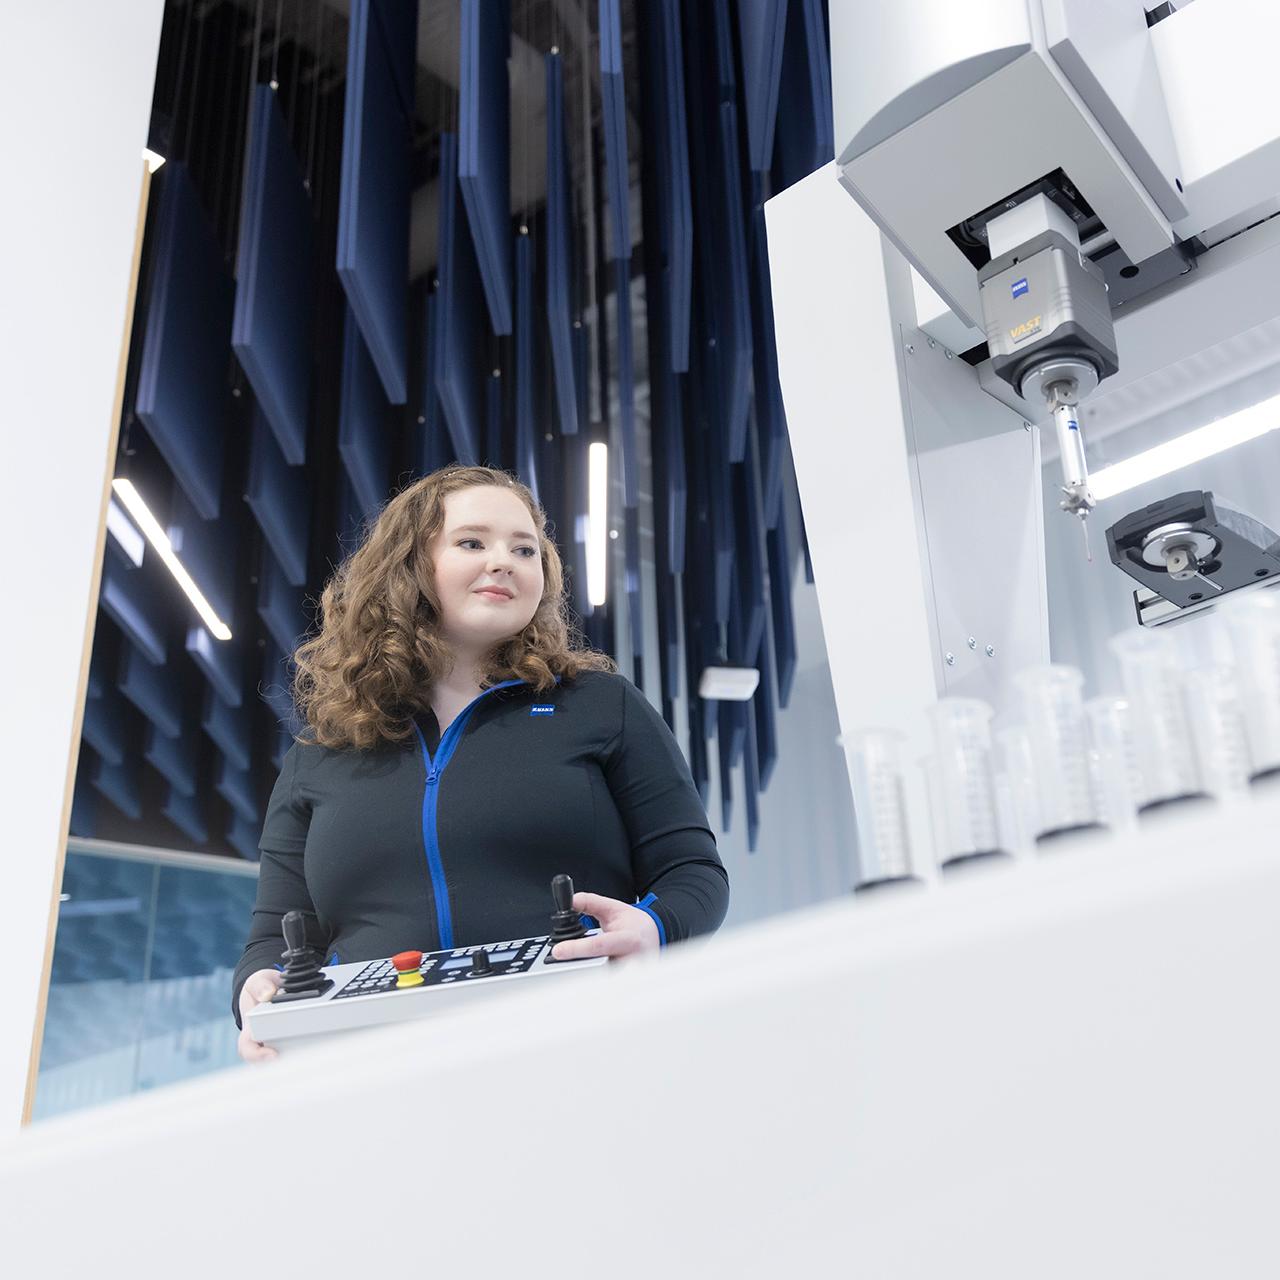 ZEISS engineer working in Engineering and Project Management